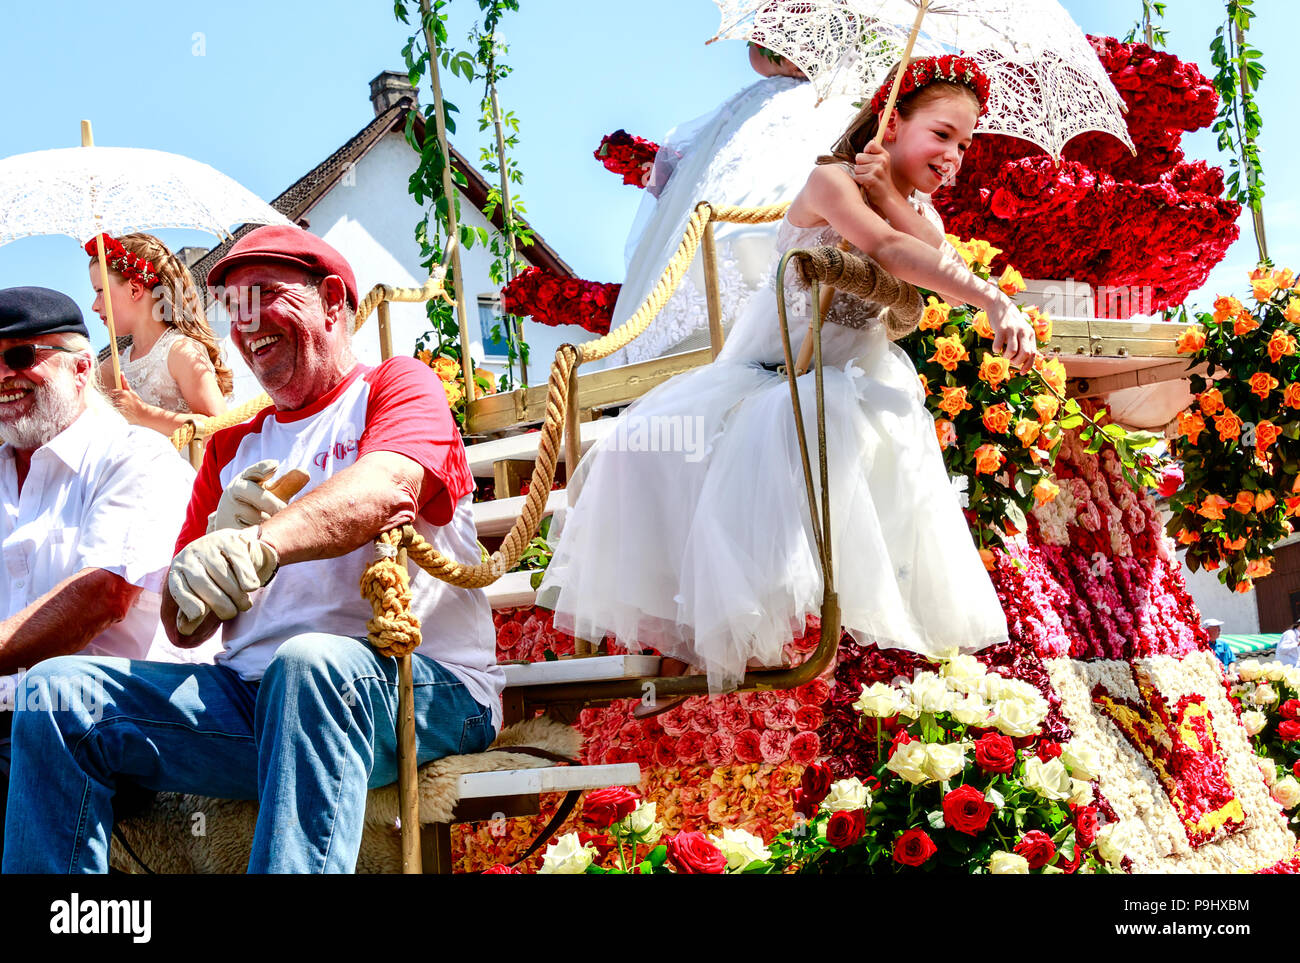 STEINFURTH, GERMANY-JULY 15, 2018: Traditional Rose festival in Bad Nauheim suburb Steinfurth, the oldest rose village in Germany. Stock Photo